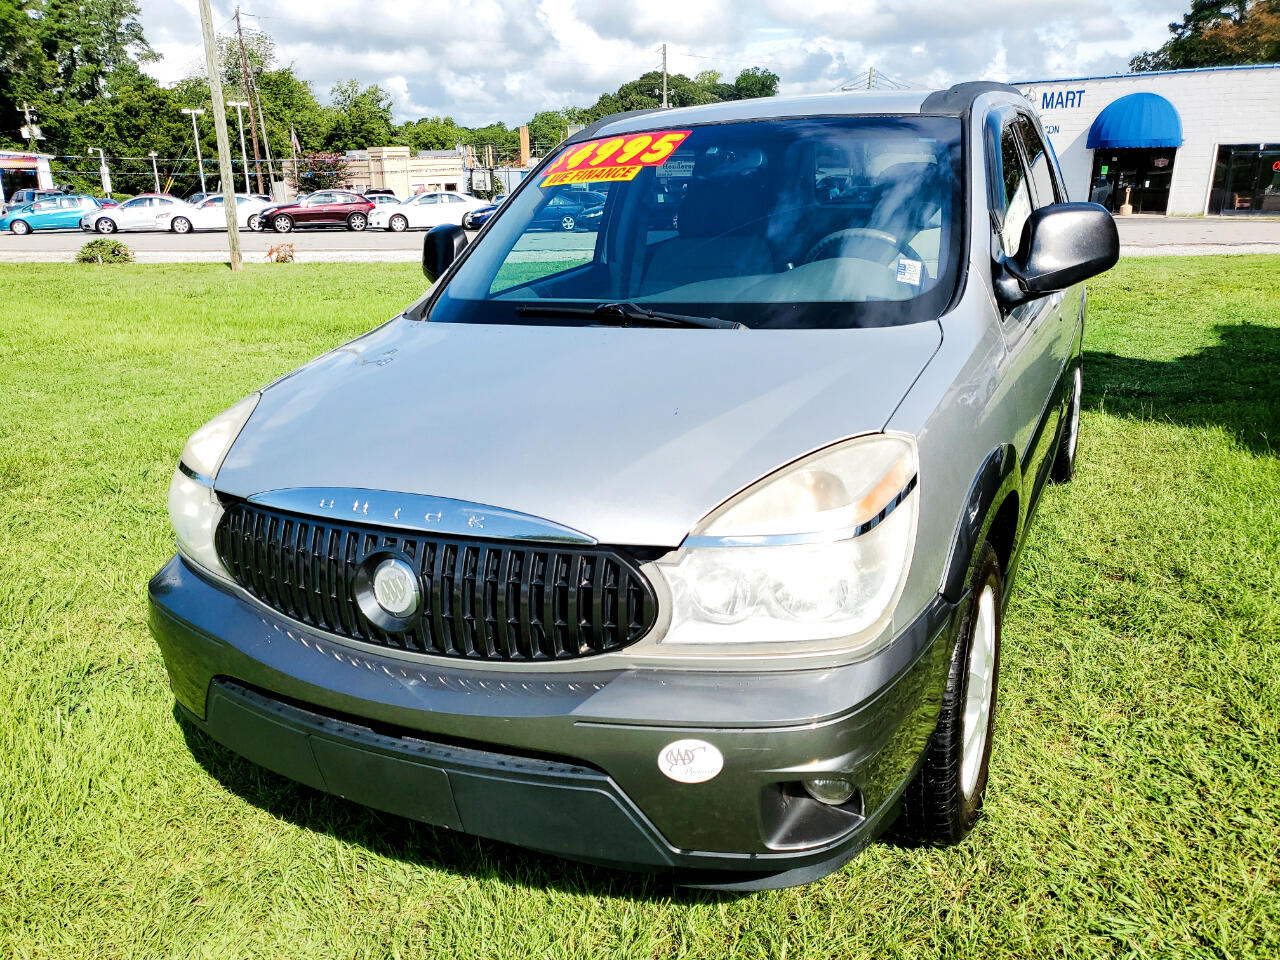 Used 2005 Buick Rendezvous 4dr FWD for Sale in Henderson NC 27536 Auto Mart of Henderson 2005 Buick Rendezvous Rear Hatch Will Not Open